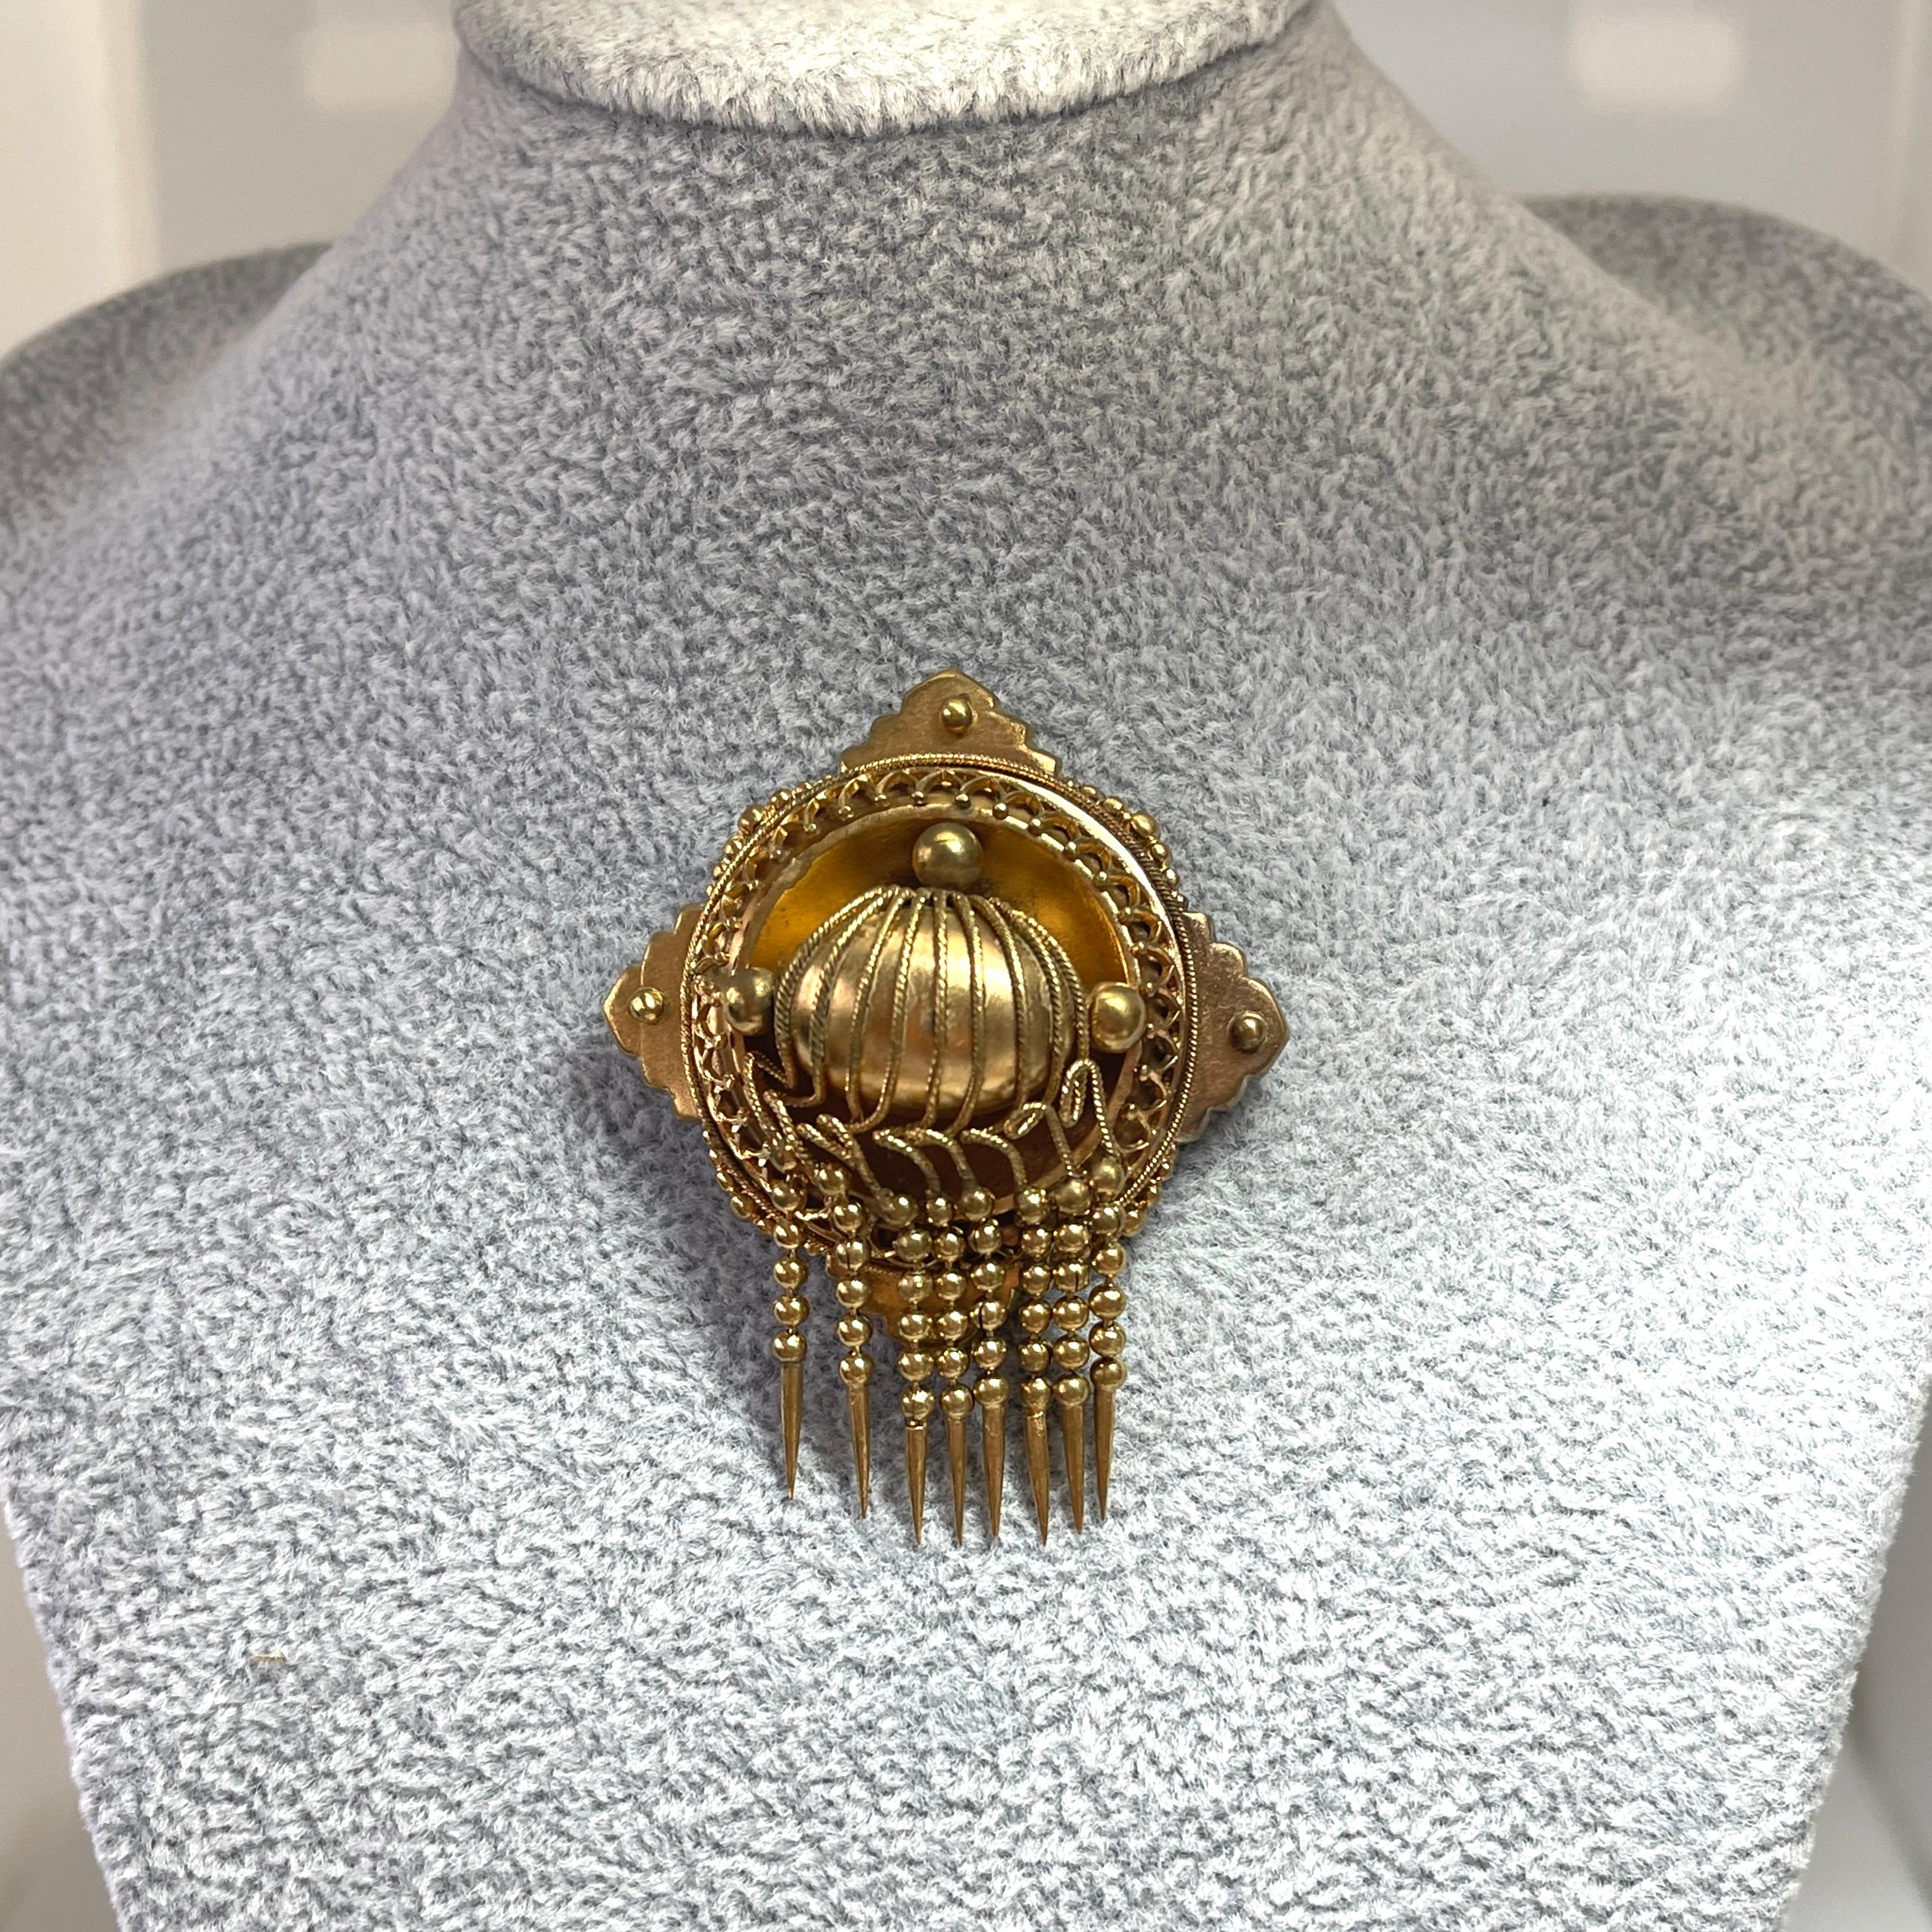 This brooch displays classic, early Victorian style.  
It has been lovingly handmade with delicate cannetille accents.  A tassel fringe dangles elegantly across the bottom of the brooch.  It is so typical of the early Victorian era.
We brought this